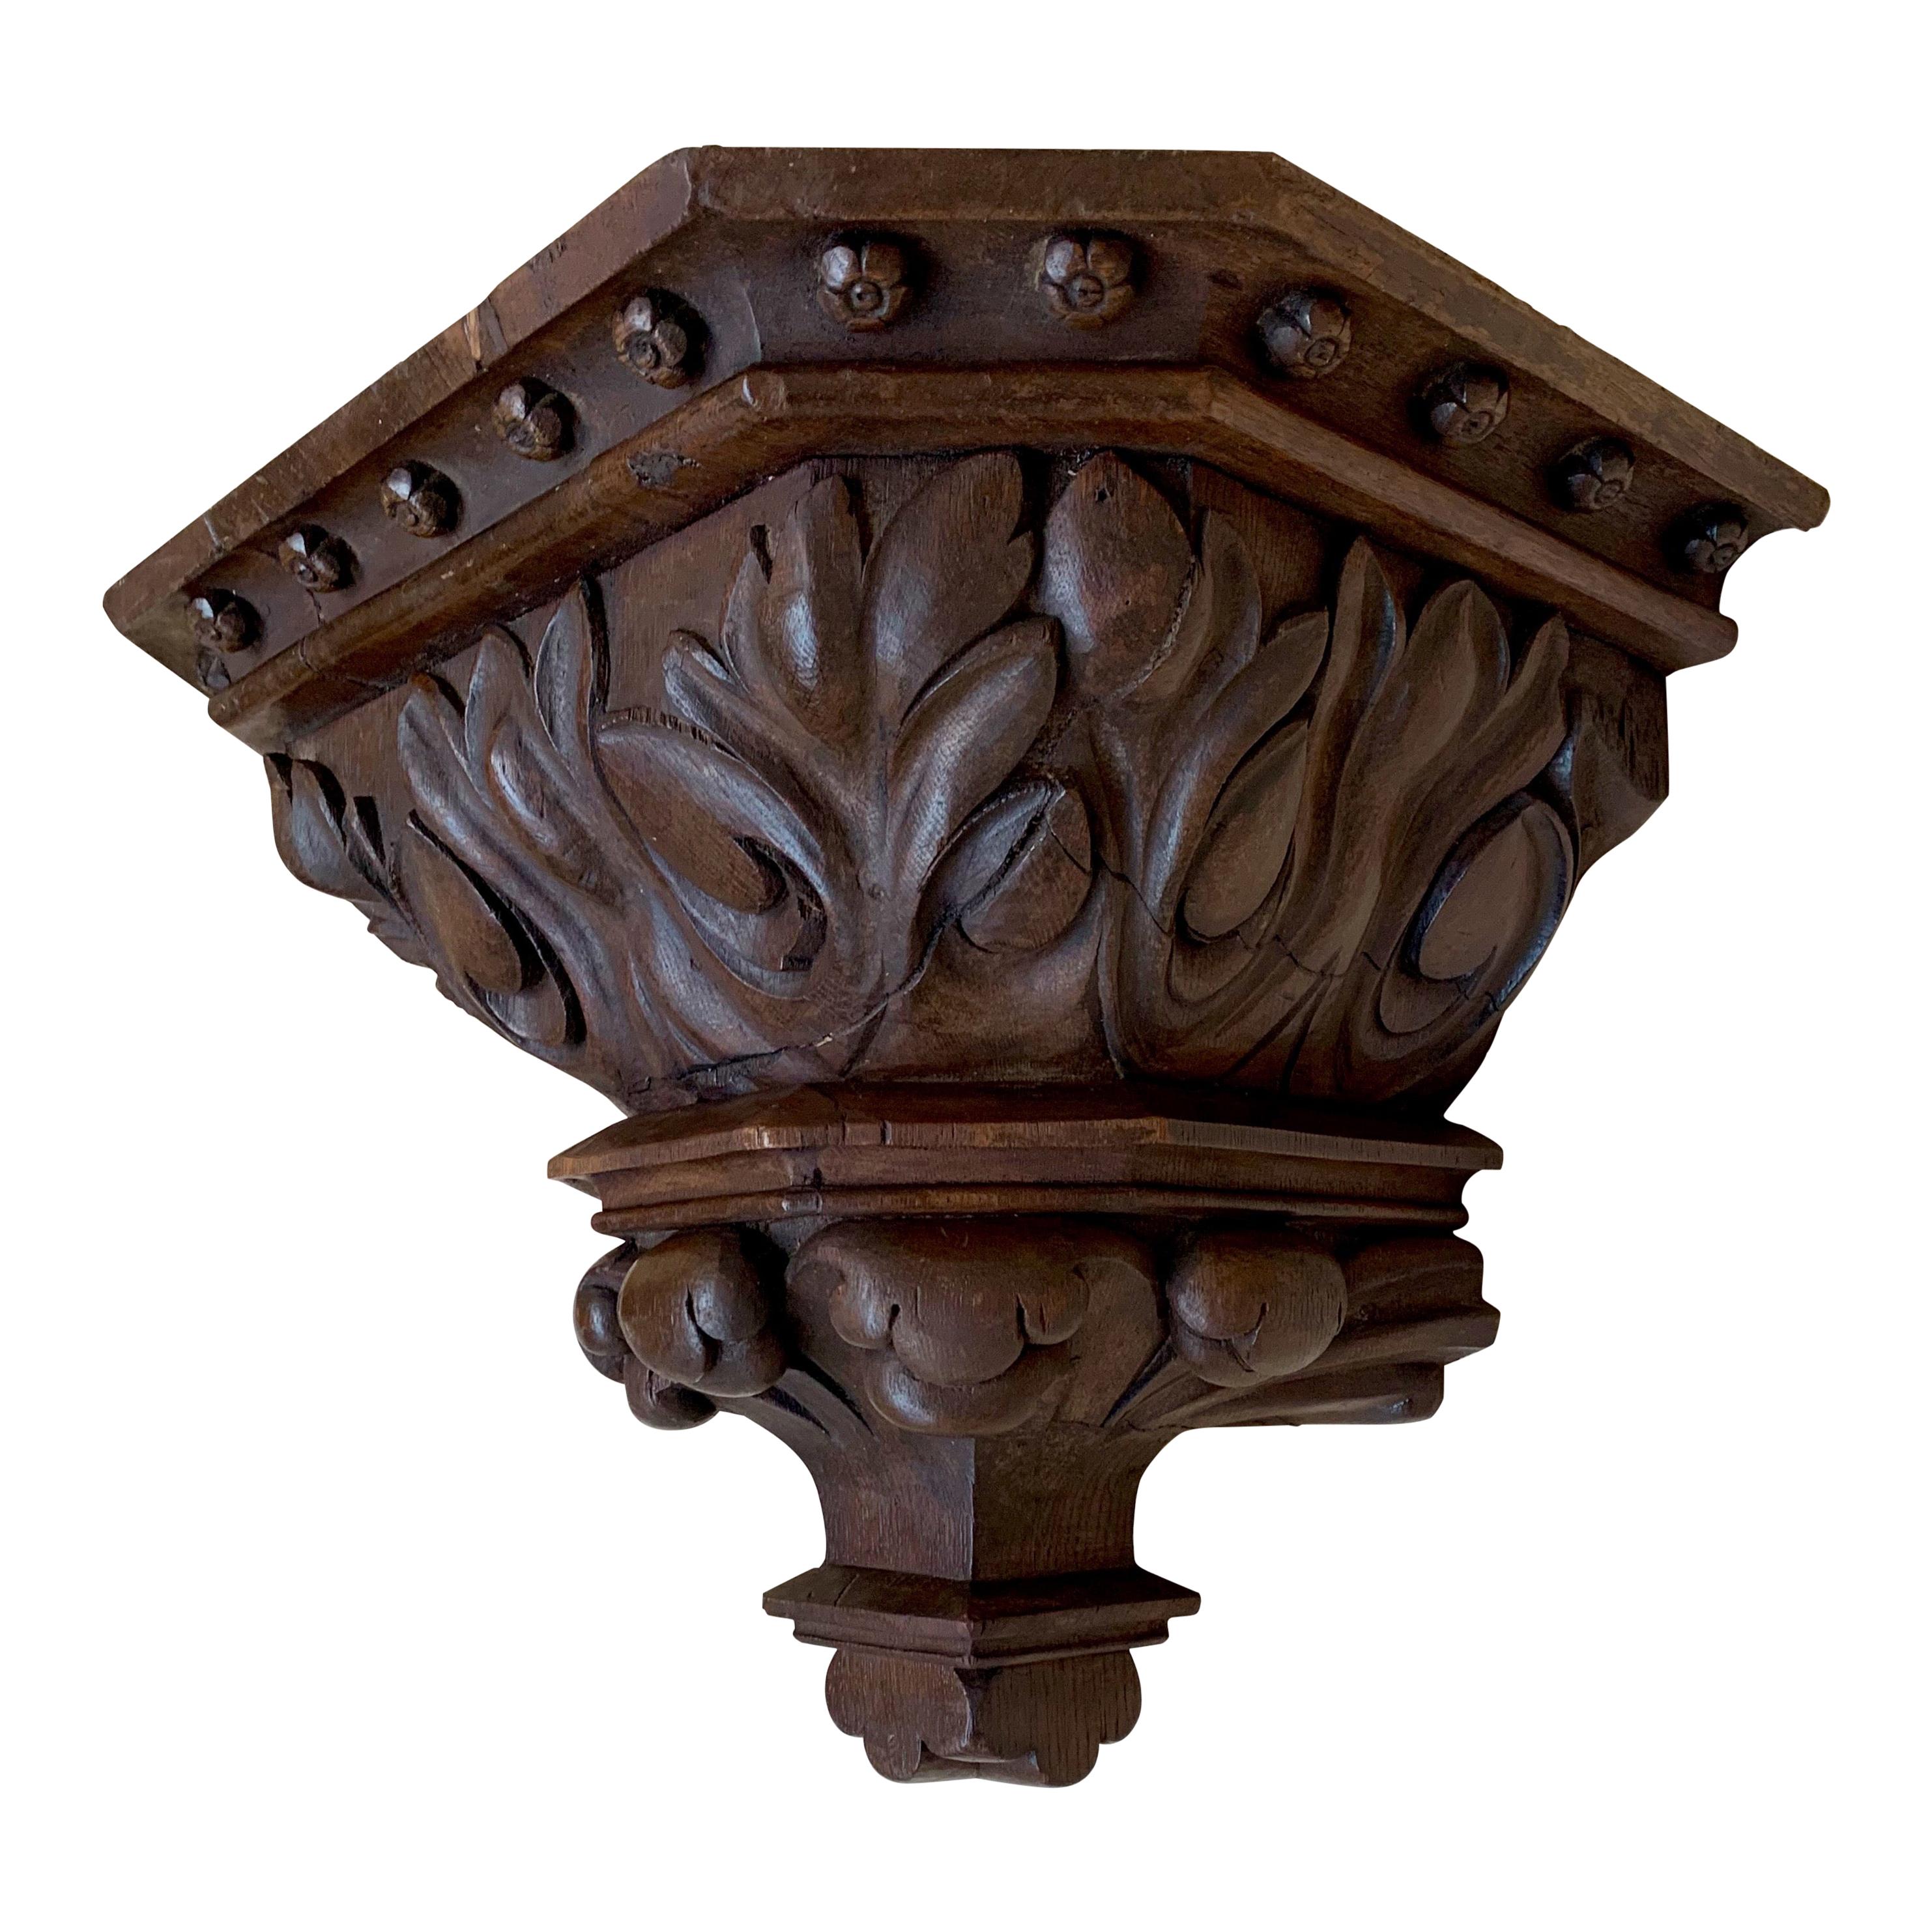 Impressive Large Size and Deeply Carved Oak Gothic Church Wall Bracket / Shelf